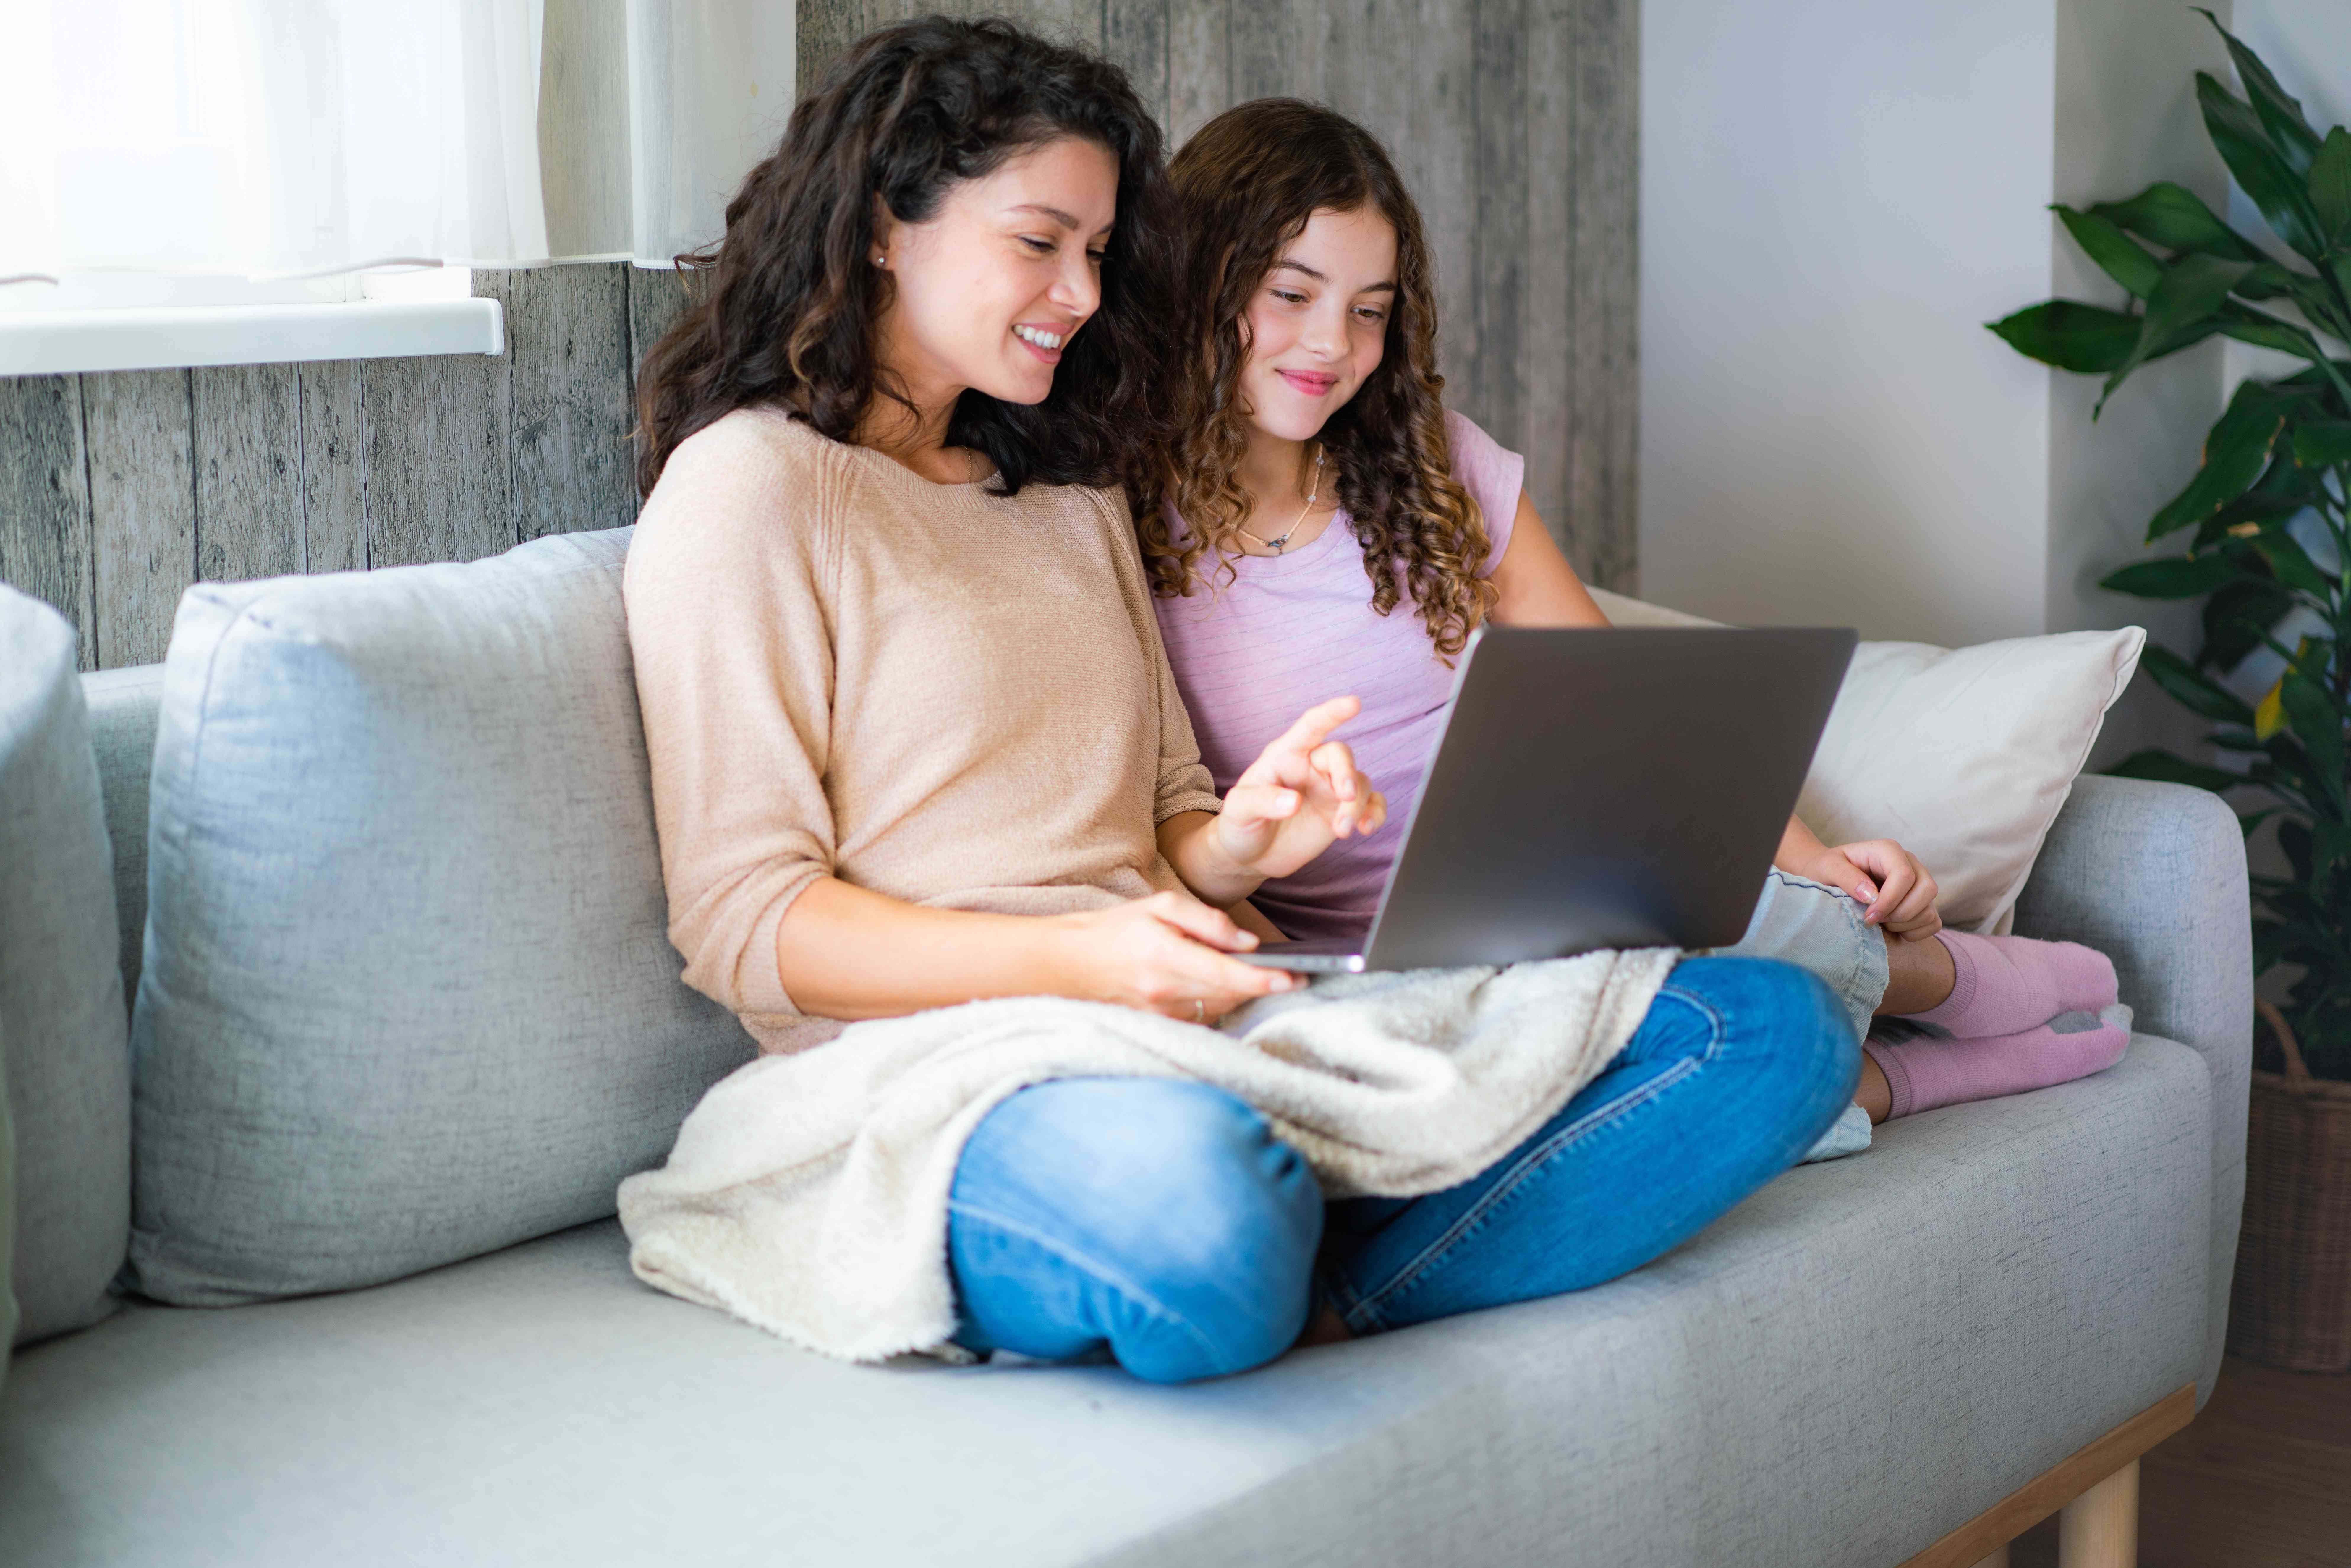 Mom and young daughter at home on couch, looking together at laptop